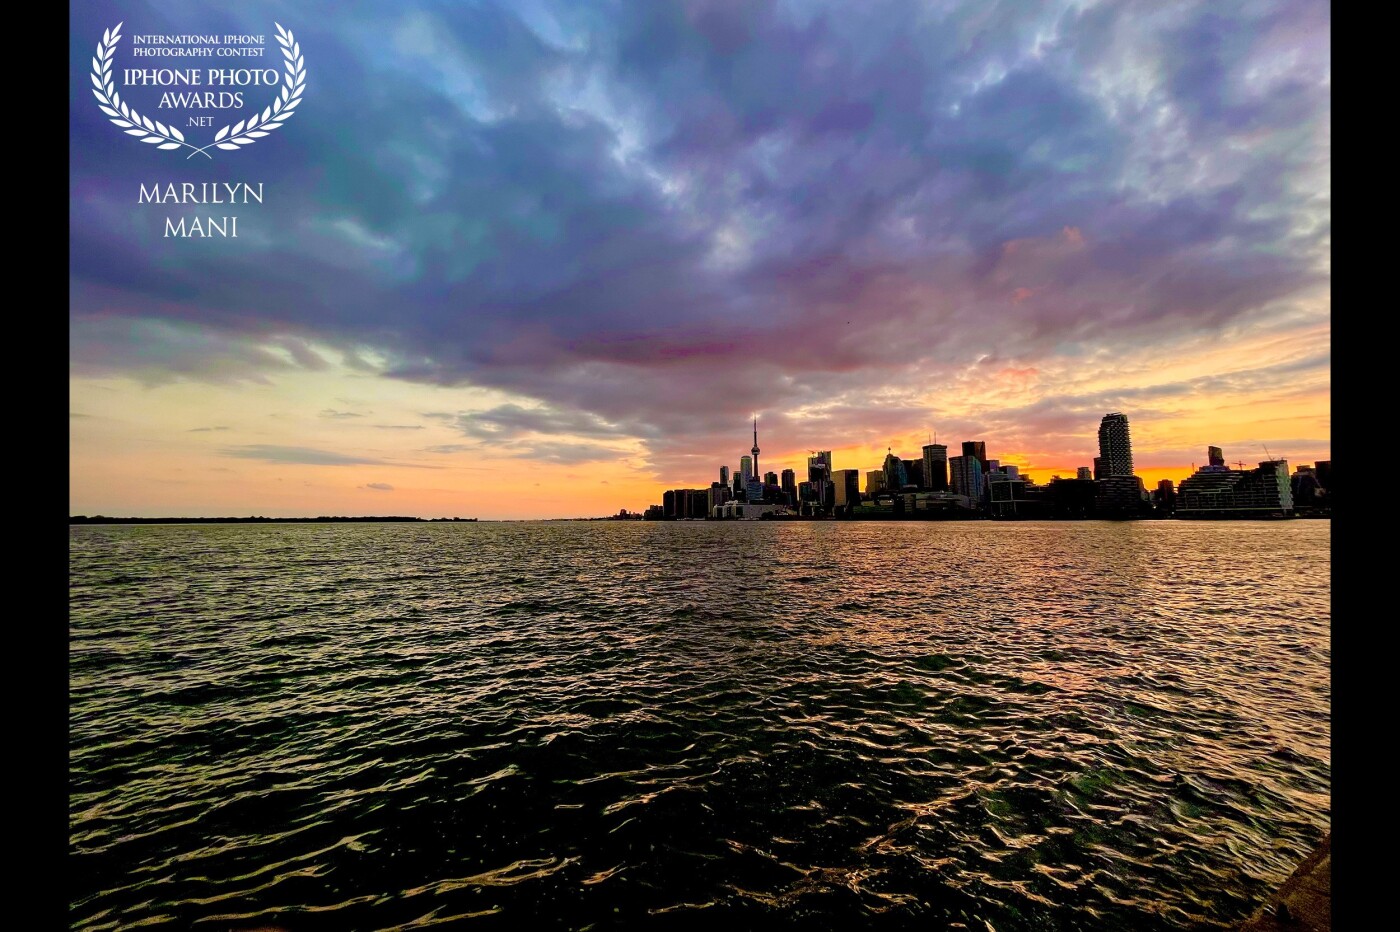 The mesmerizing Toronto skyline at sunset! One can never get enough of this view. The sky is like a canvas with a unique painting every day and this shot captures just that from a beautiful evening.